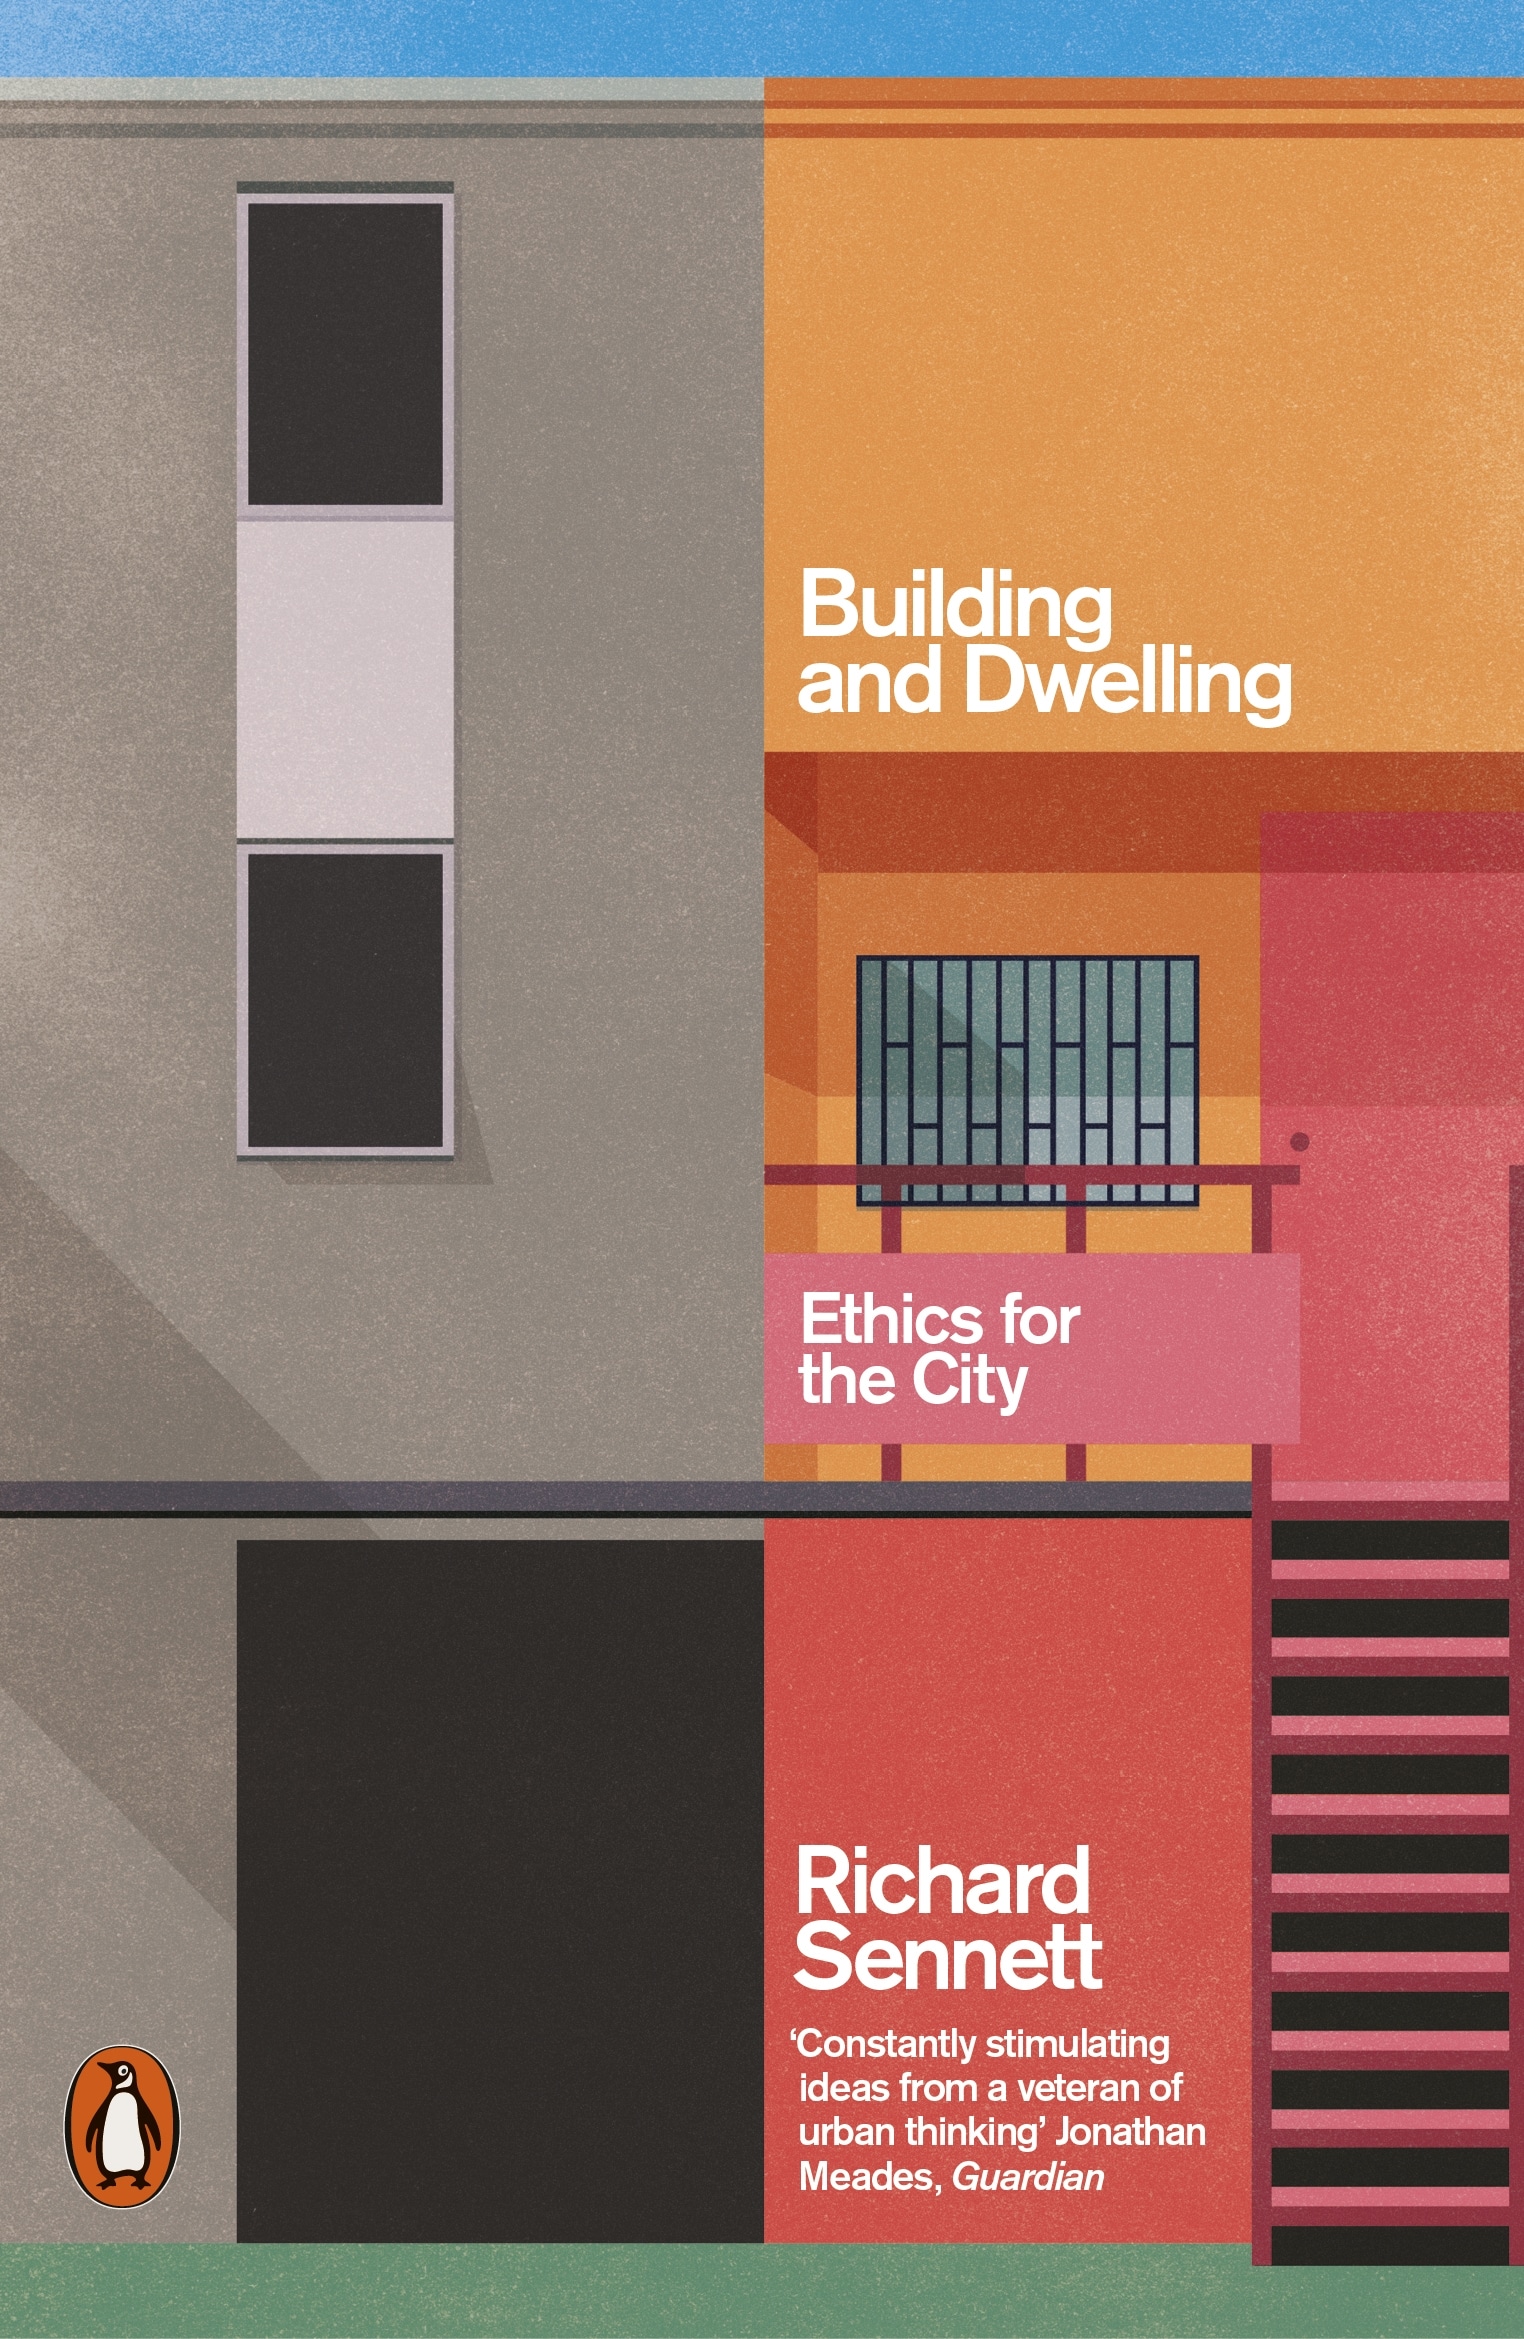 Book “Building and Dwelling” by Richard Sennett — April 4, 2019